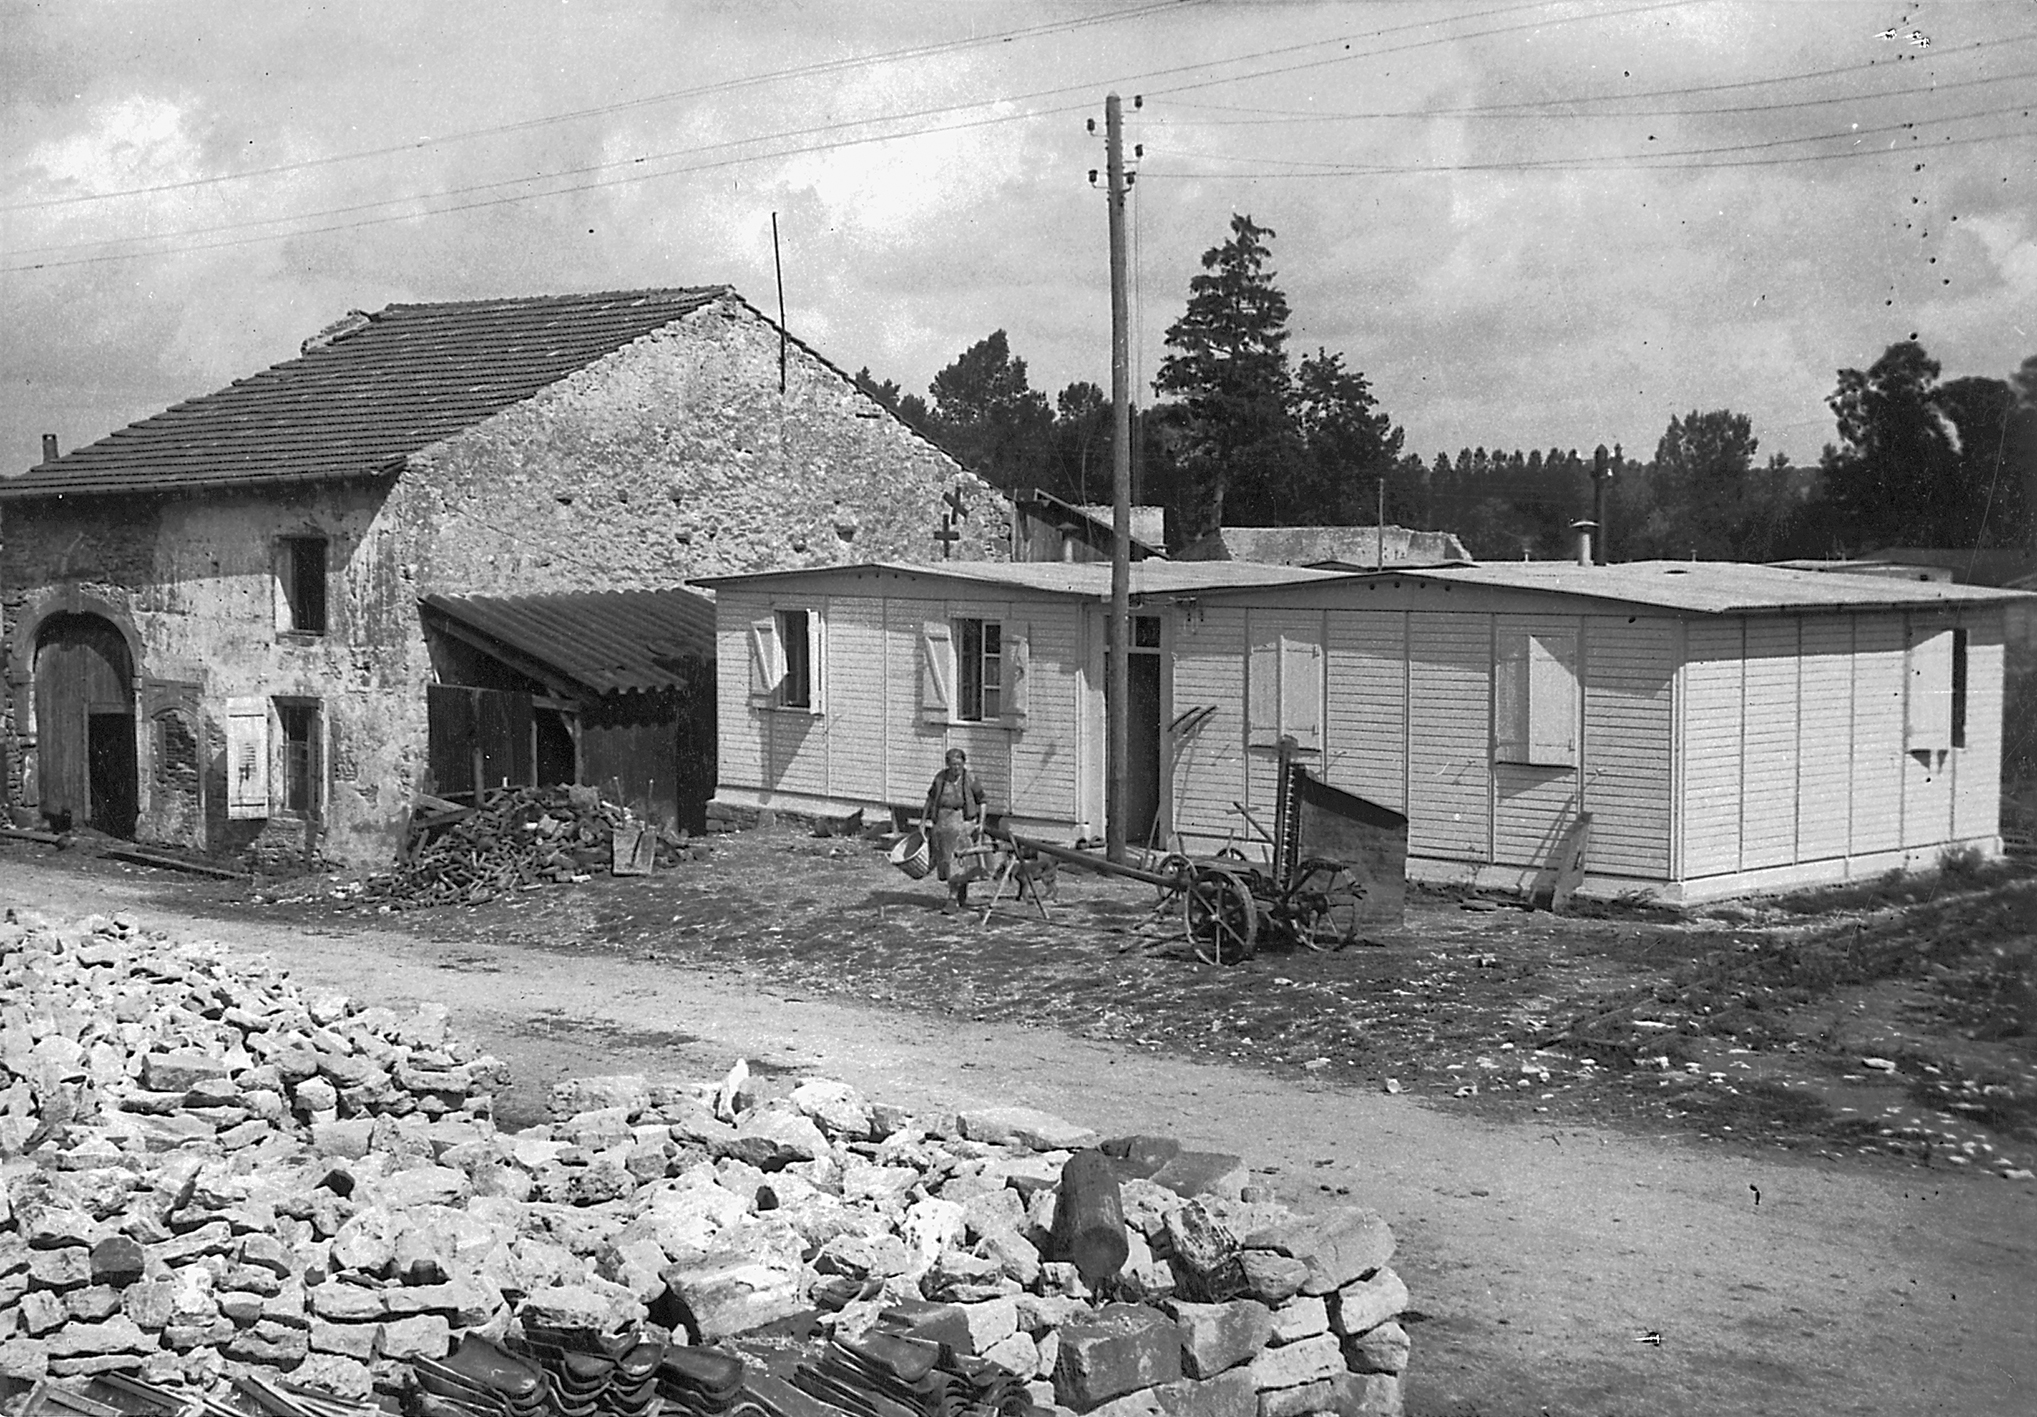 6x6 Demountable house, location unknown, ca. 1945.